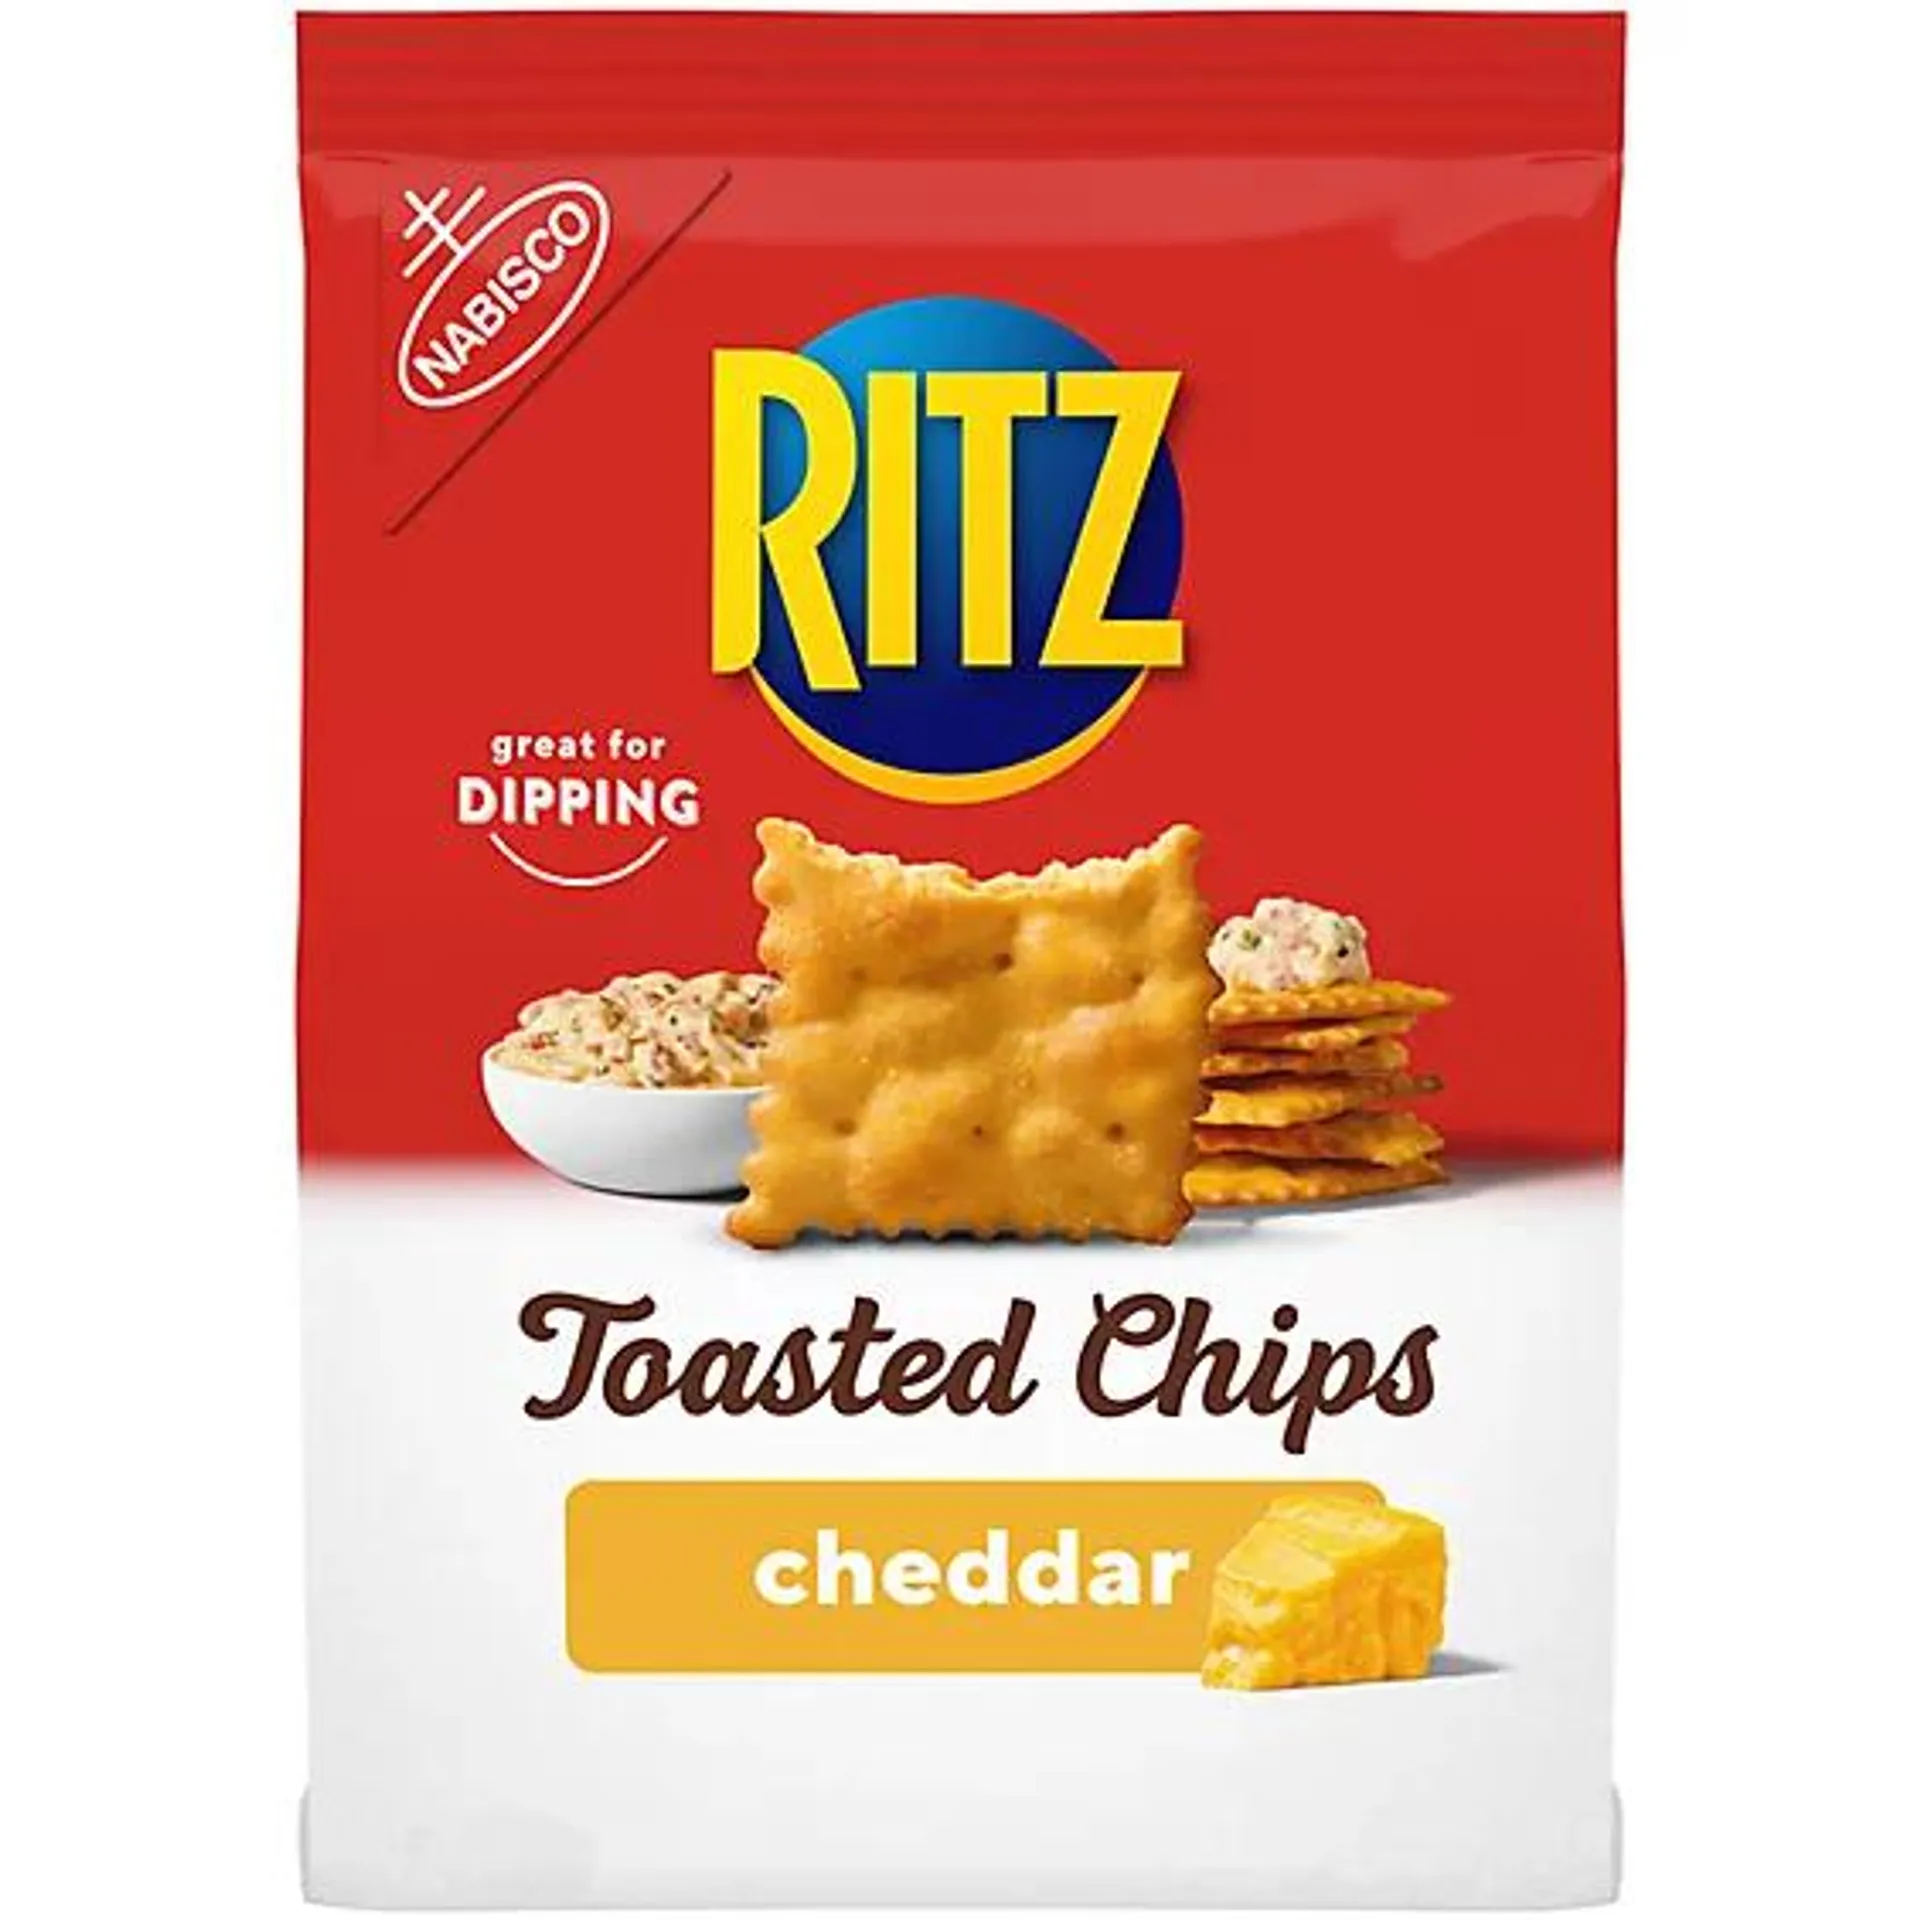 RITZ Toasted Chips Cheddar Crackers - 8.1 Oz